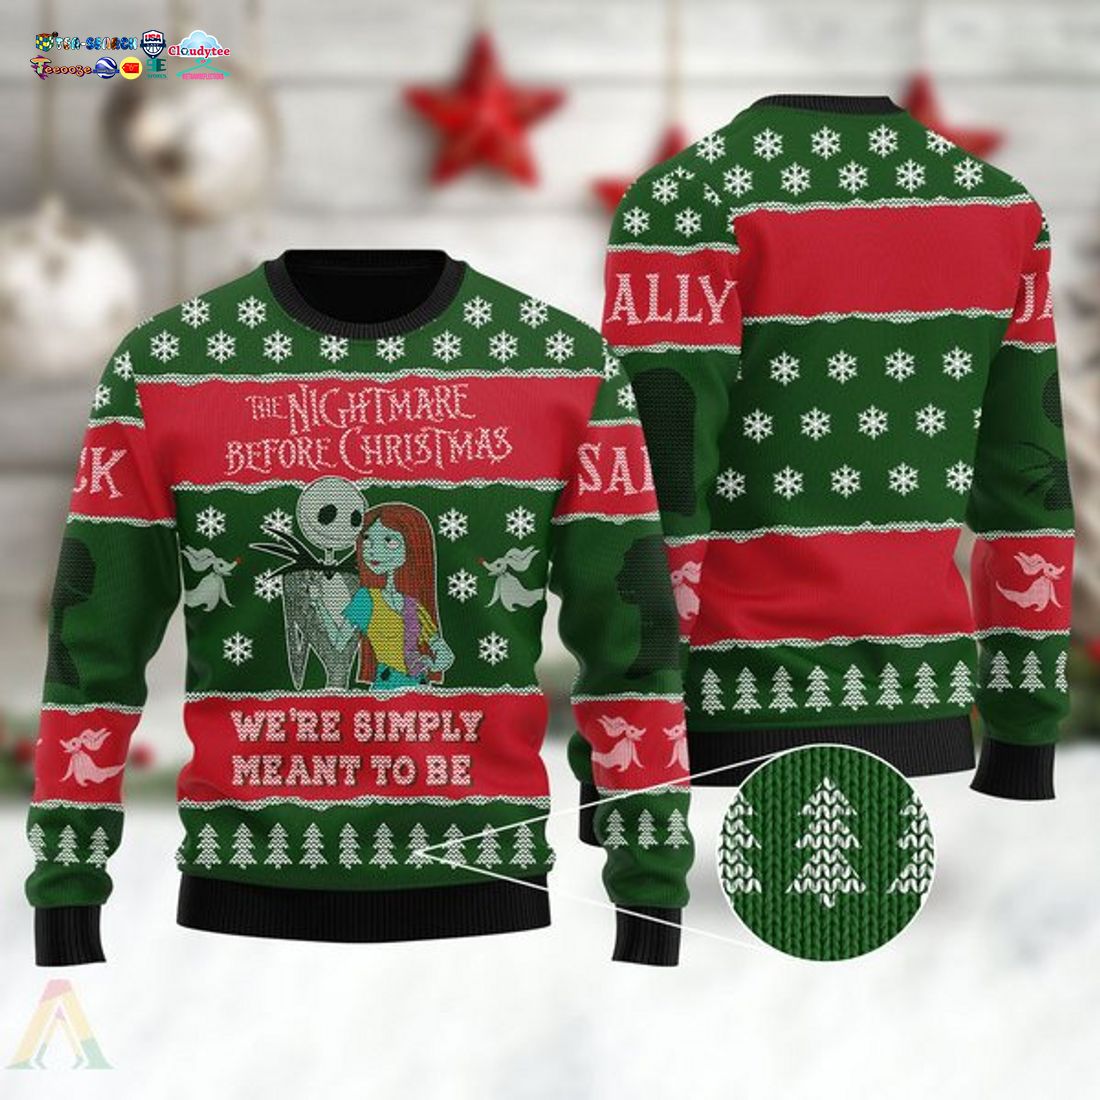 jack-and-sally-were-simply-meant-to-be-ugly-christmas-sweater-1-A24fz.jpg